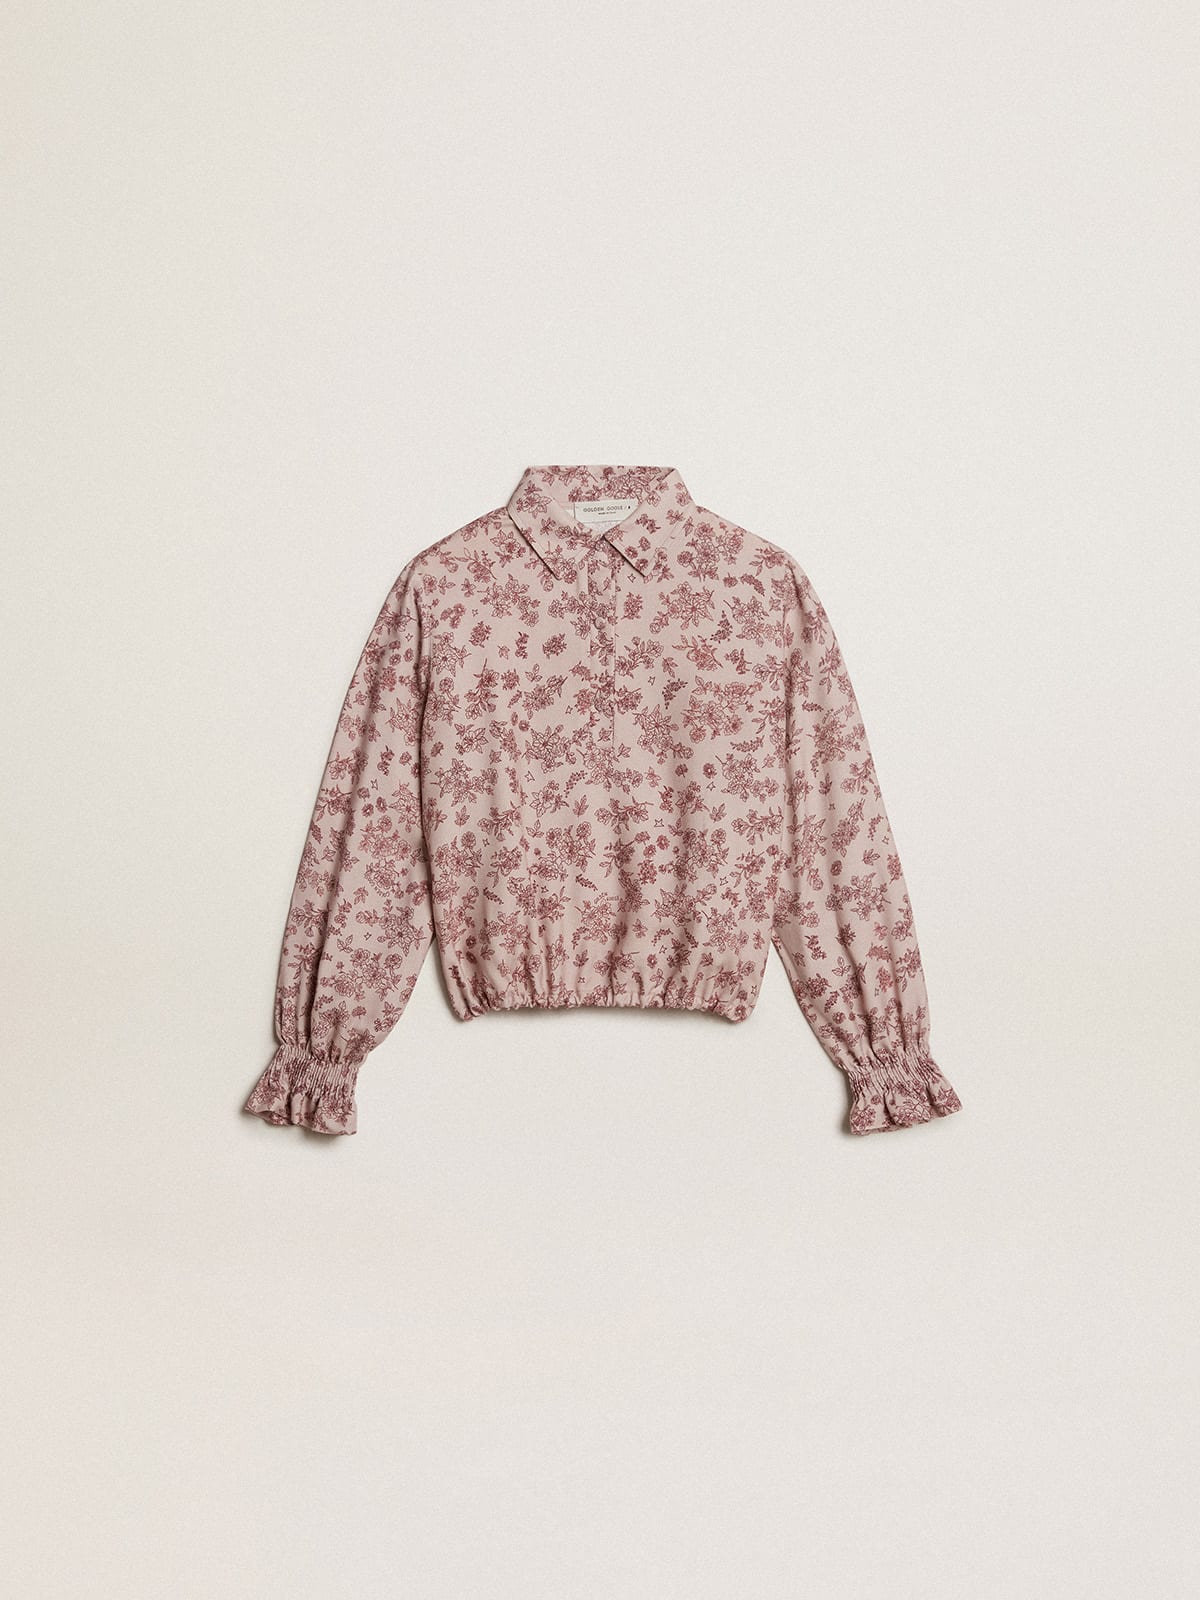 Golden Goose - Polo shirt in powder-pink viscose with floral print in 